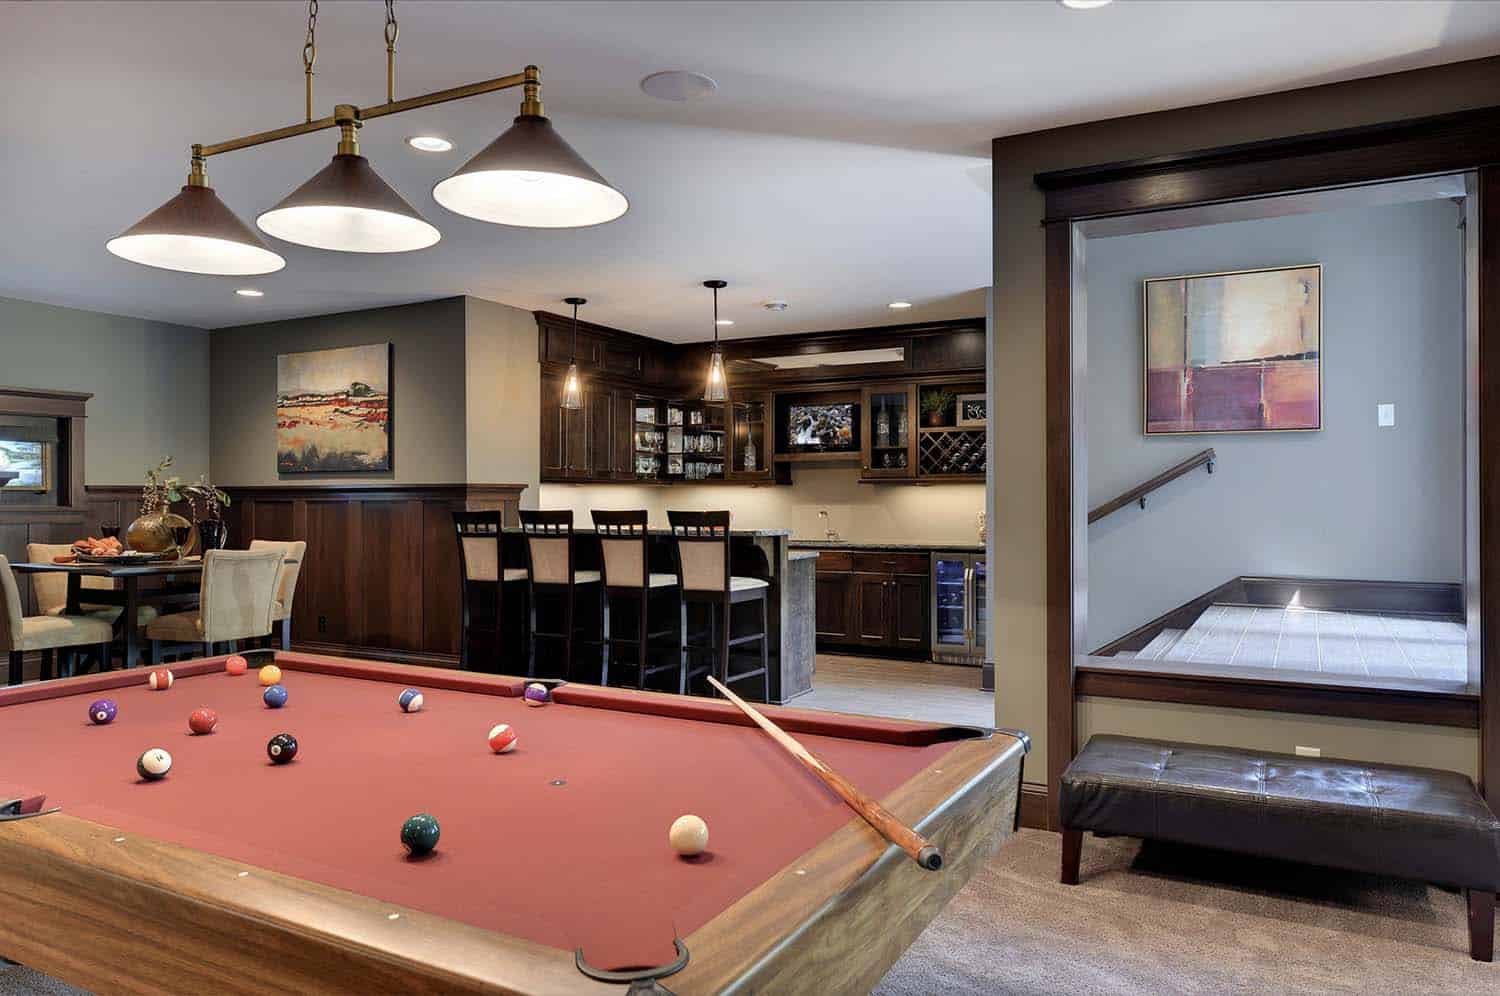 traditional style pool table with a view to the home bar